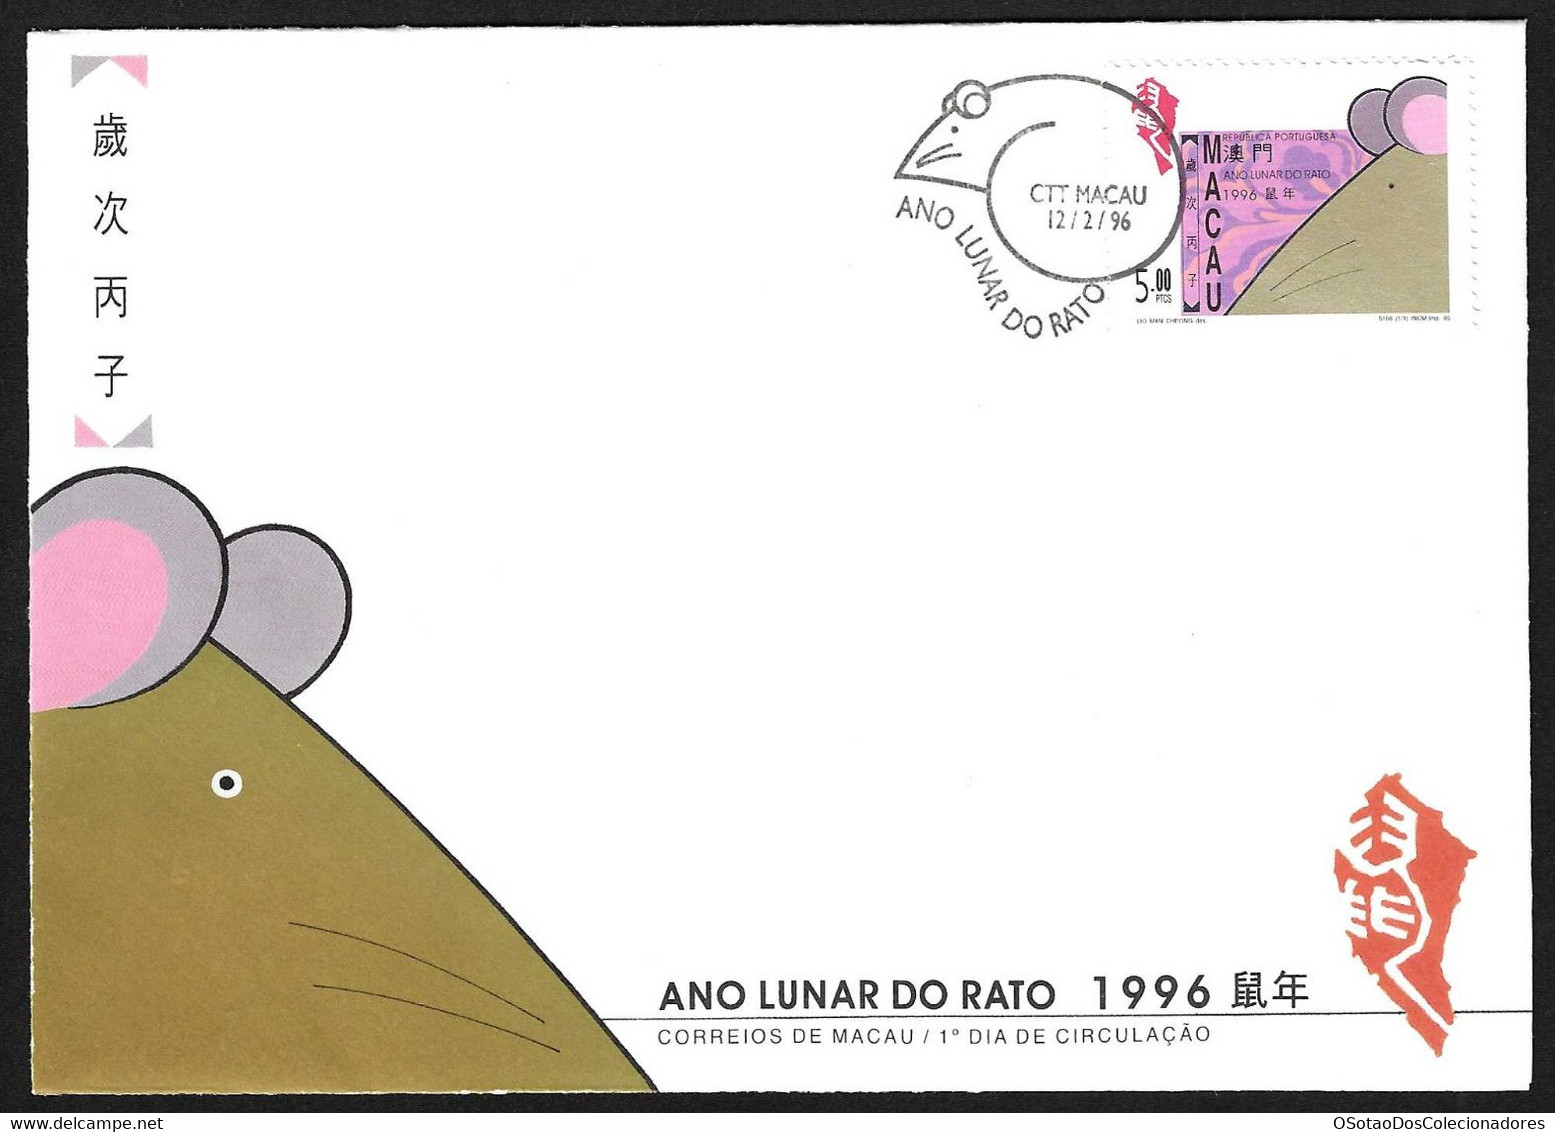 Macau Macao Chine Cover FDC 1996 - Ano Lunar Do Rato - Chinese New Year - Year Of The Rat - MNH/Neuf - FDC